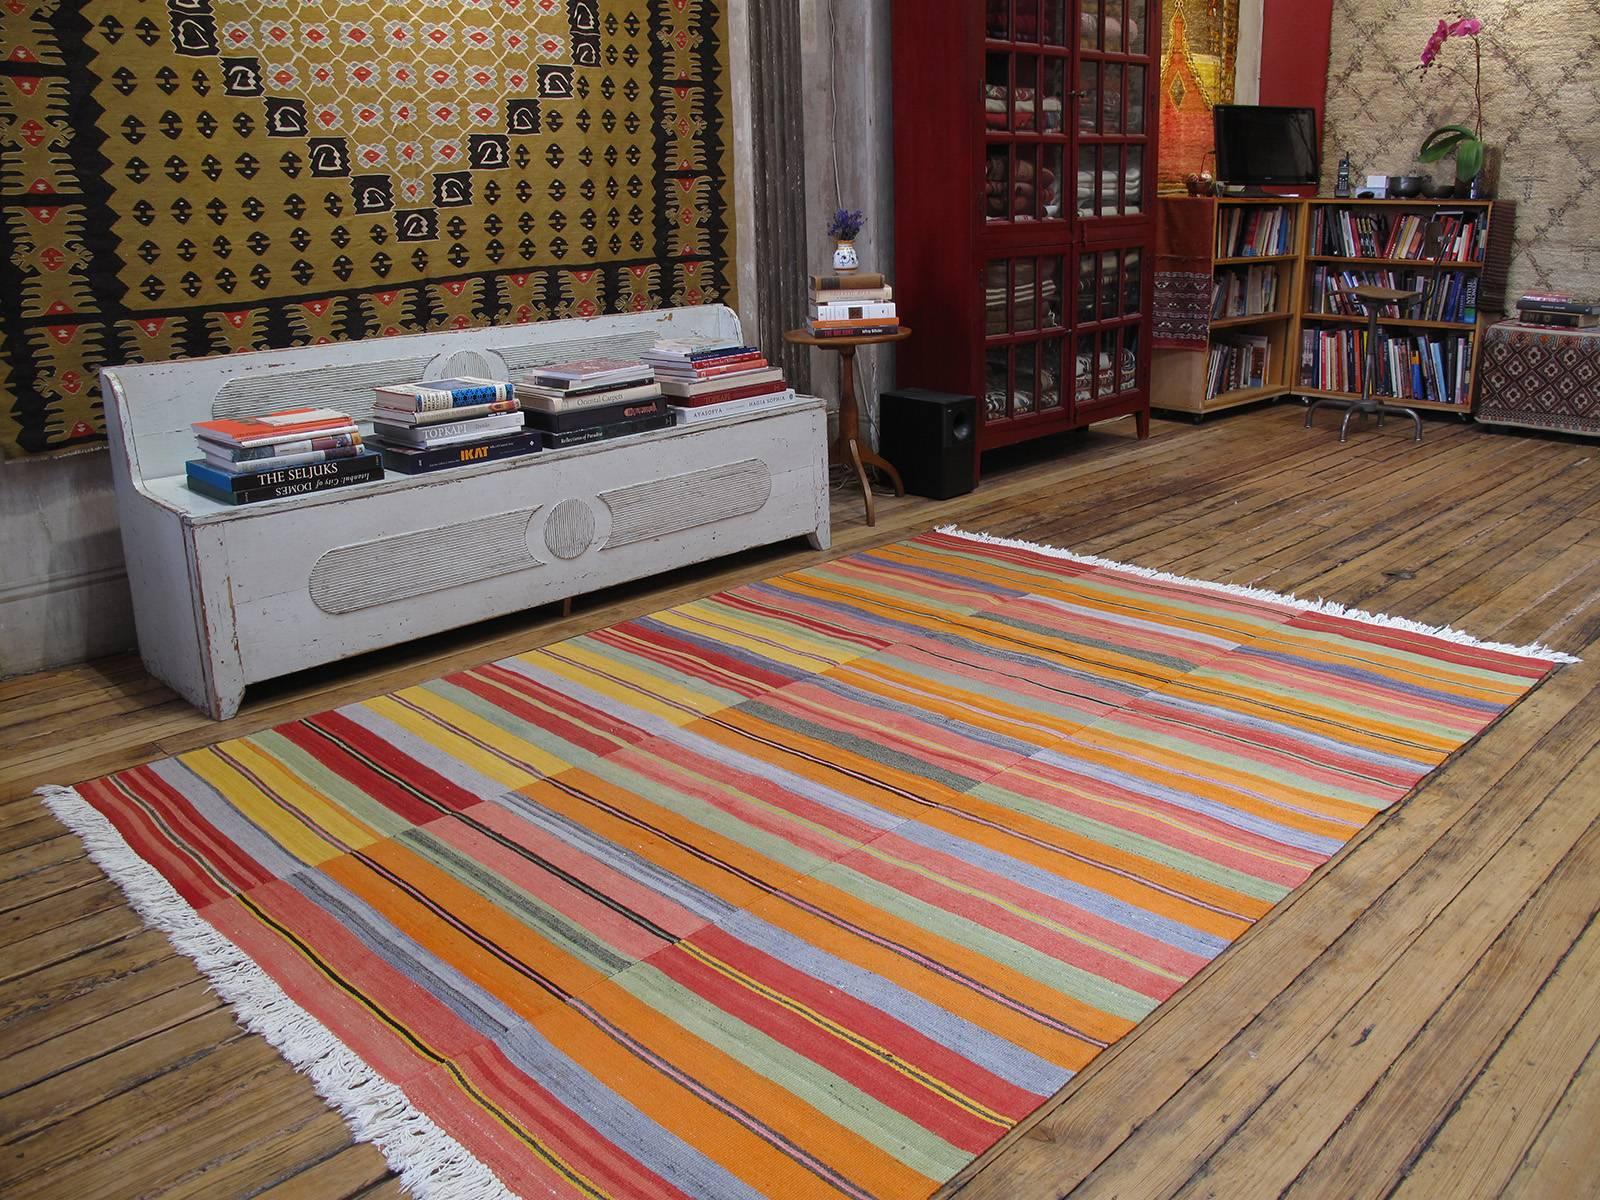 A lovely Turkish kilim, woven in three narrow panels, with a cheerful palette of colors